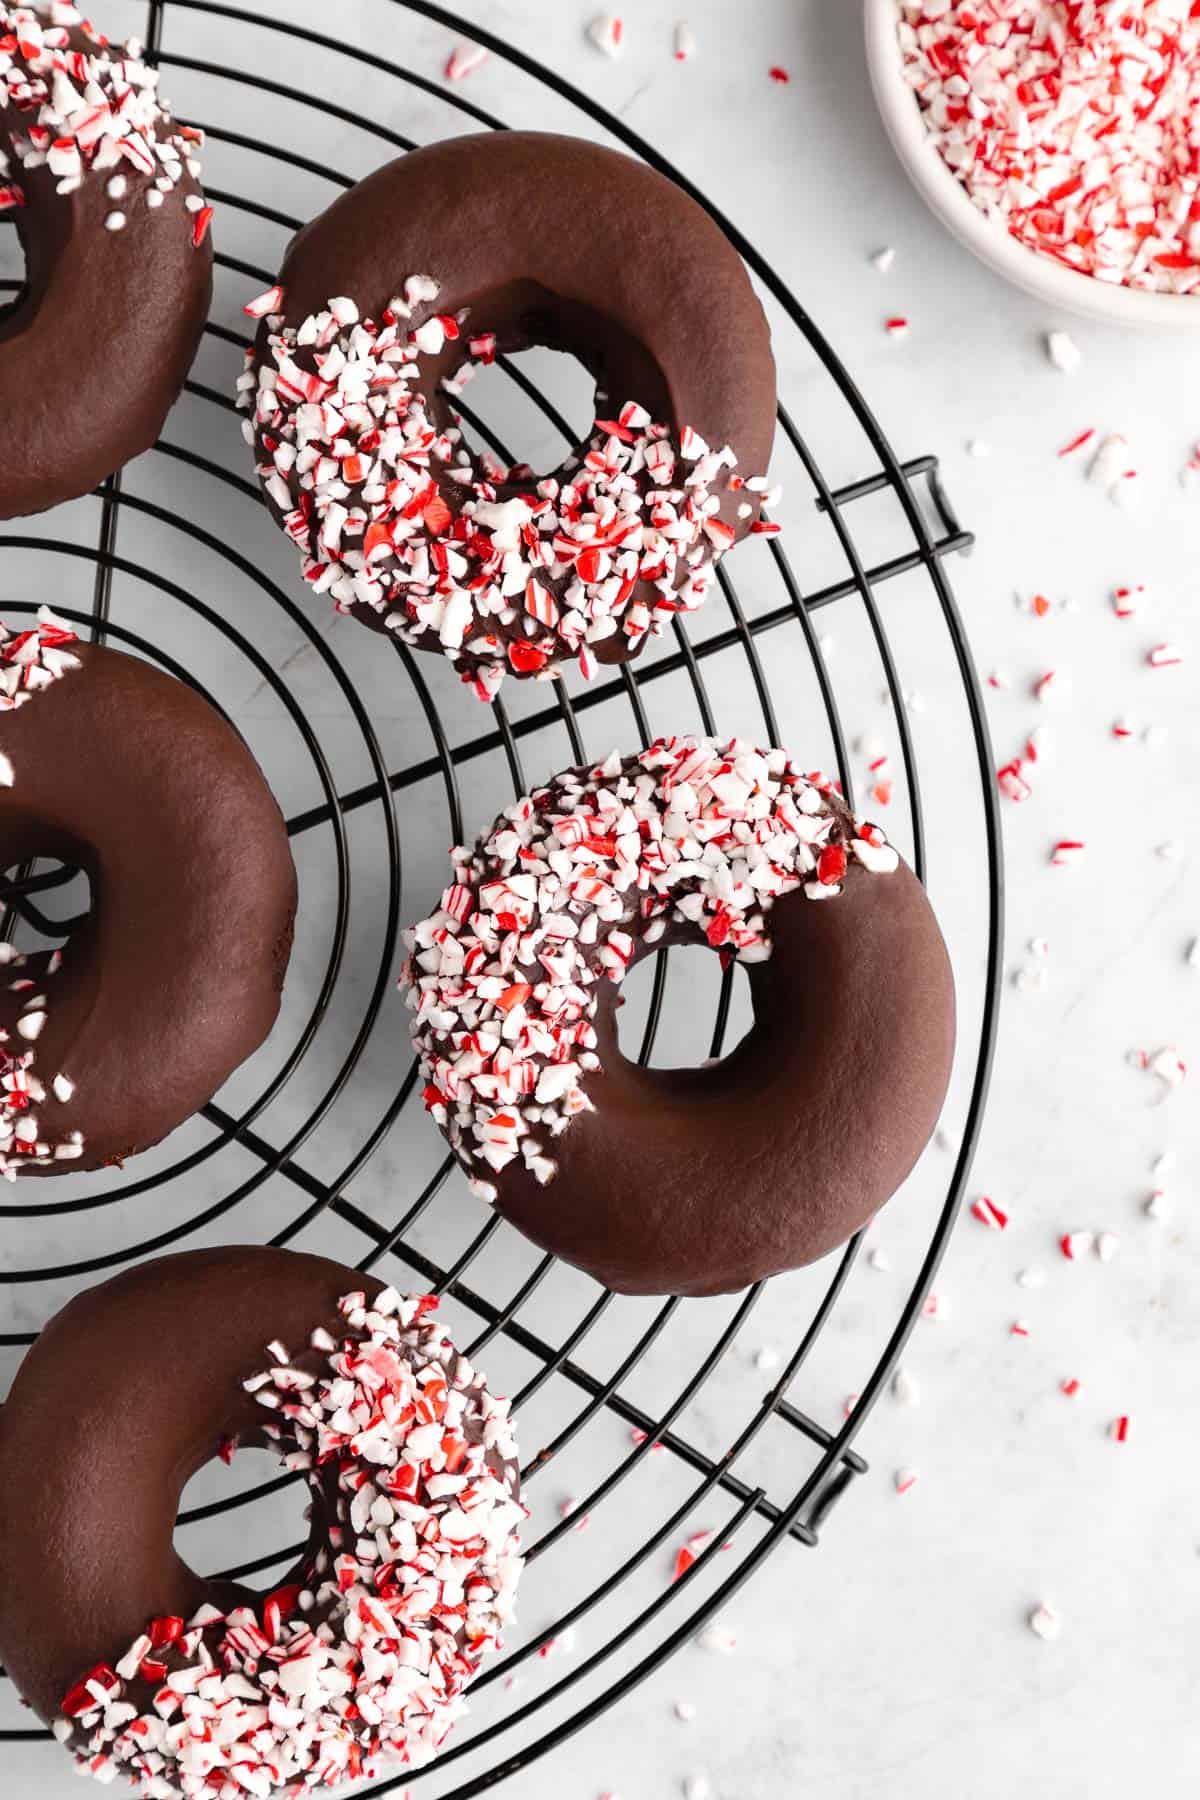 healthy peppermint mocha donuts with crushed candy canes on a black cooling rack